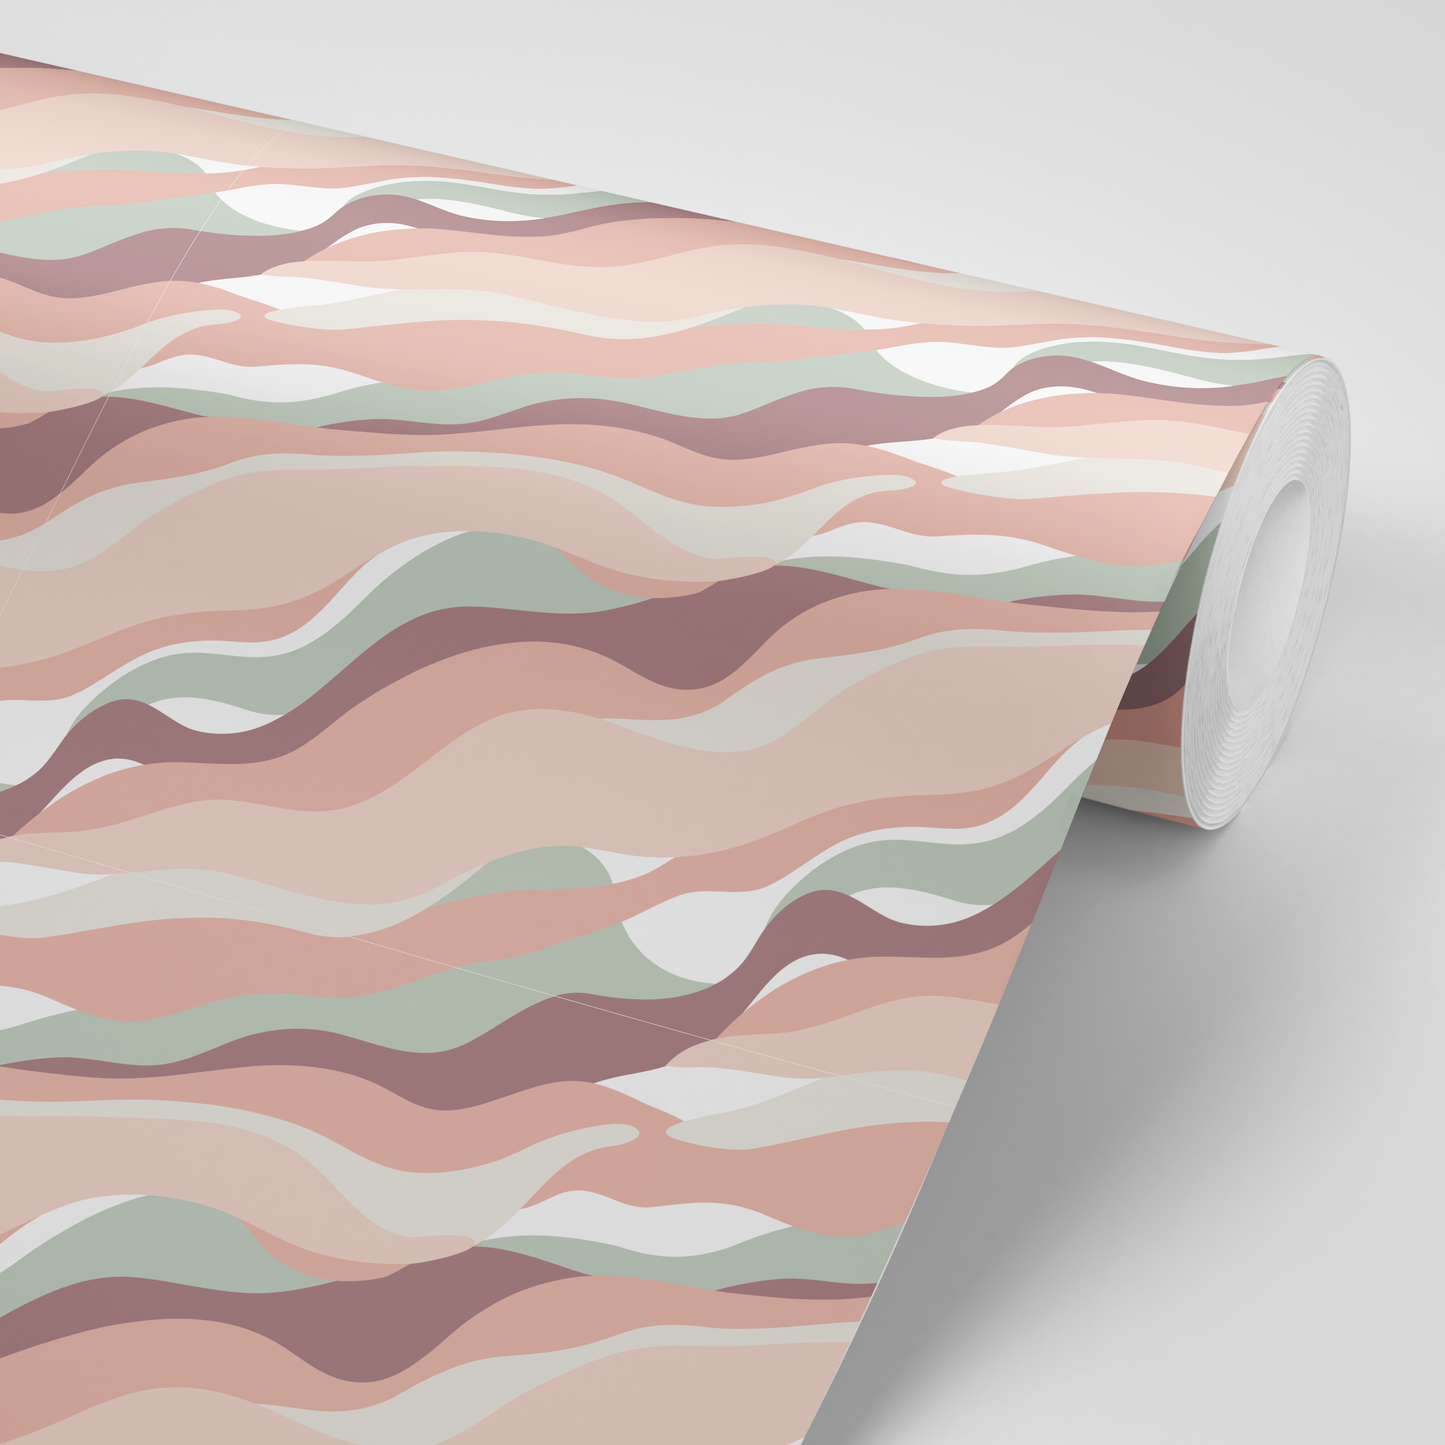 Oil Waves Contact Paper  - pack of 3 rolls (24x48" each)